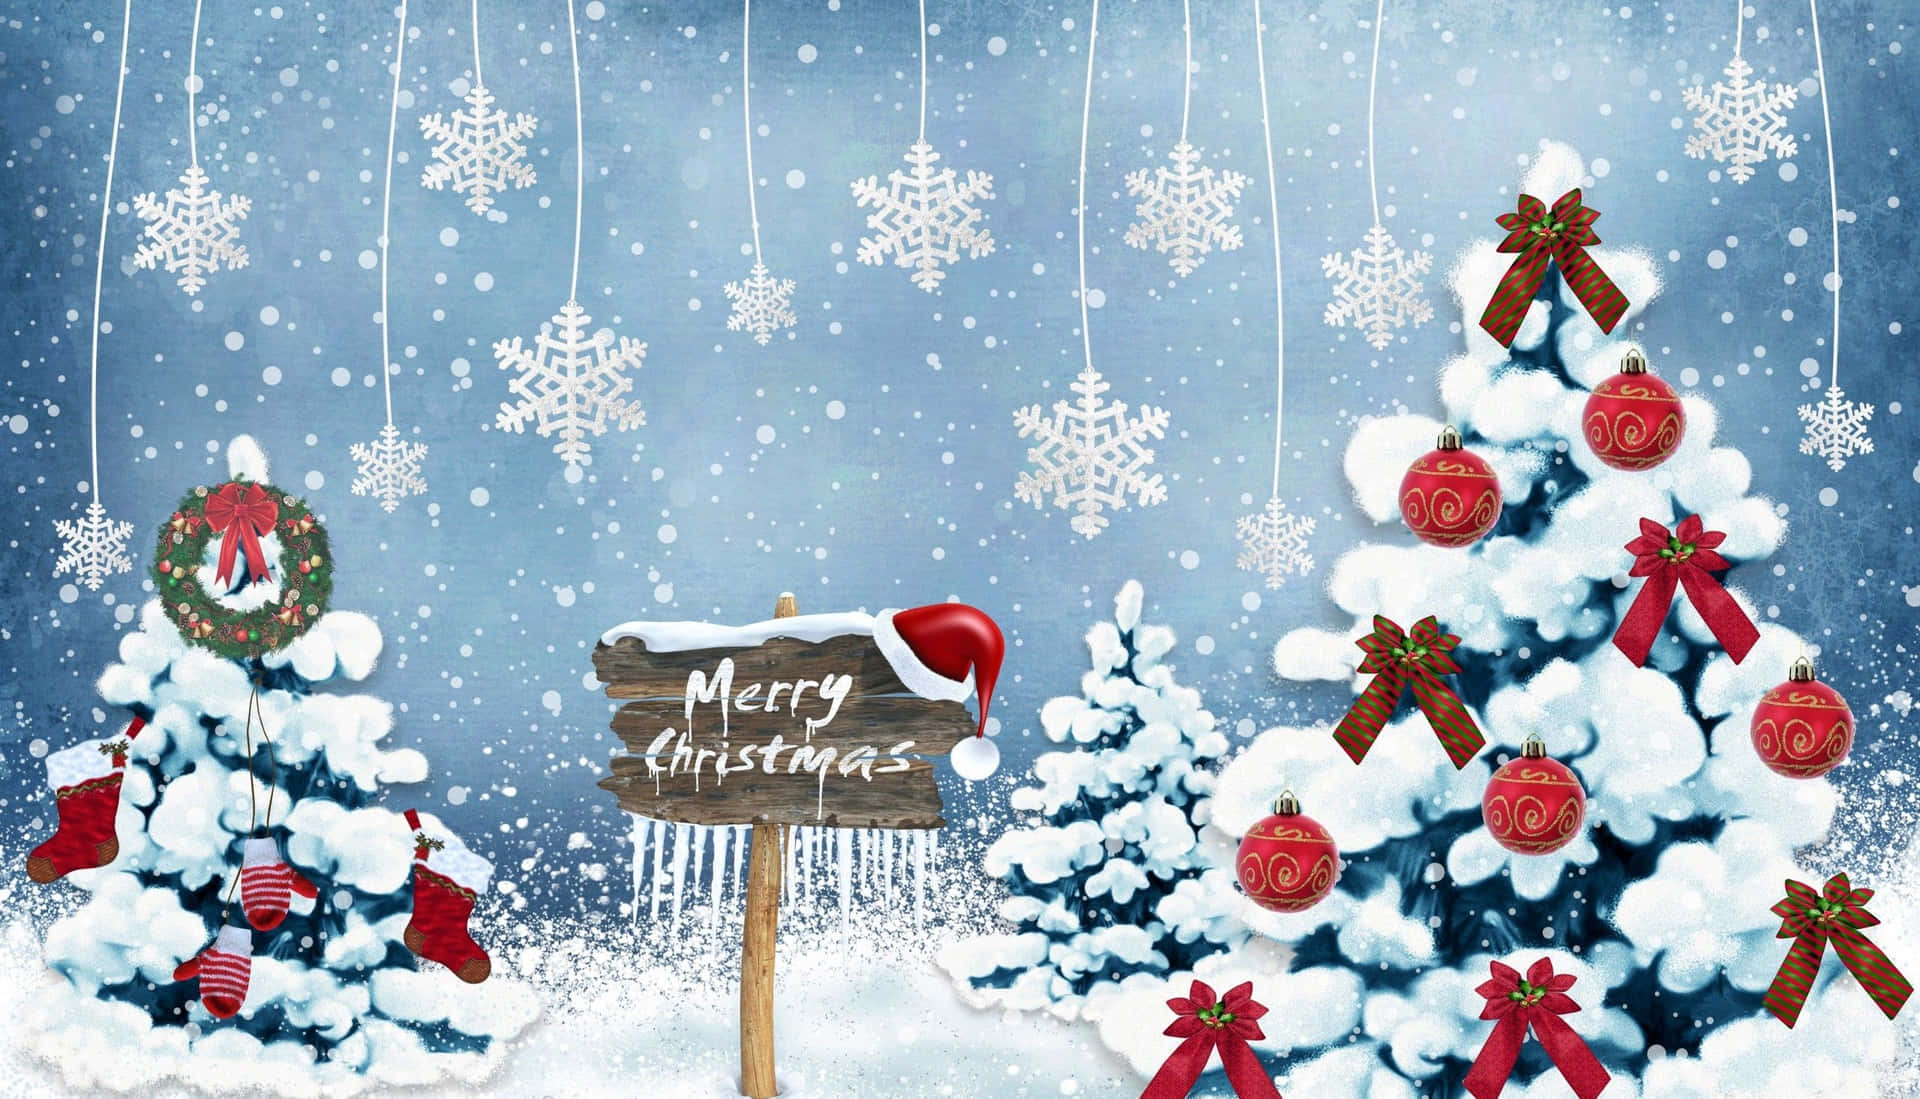 Festive And Cool Christmas Wallpaper